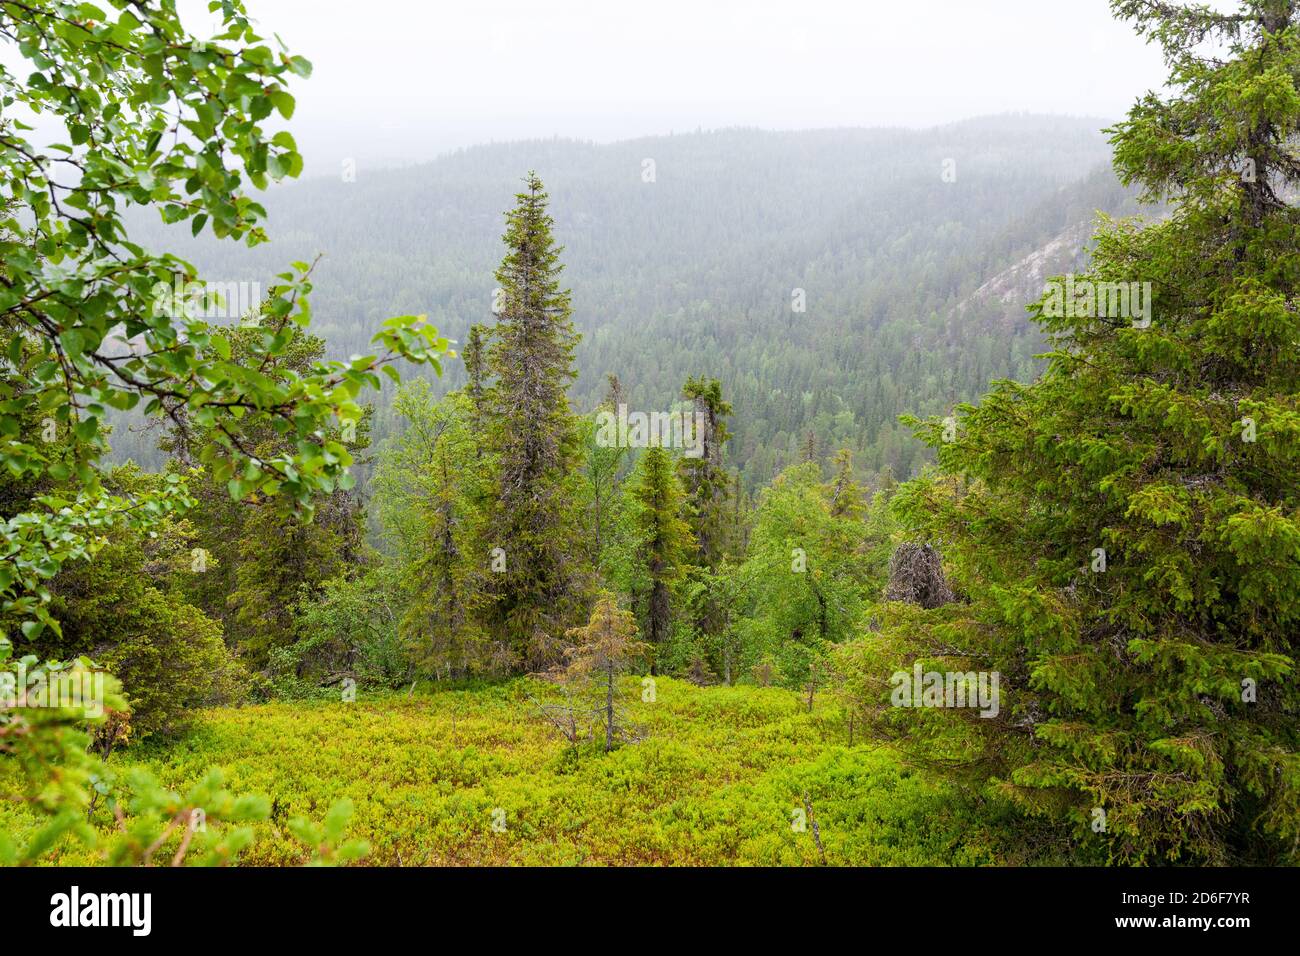 A beautiful view to a taiga forest hillside covered with trees during summertime in Northern Finland. Stock Photo